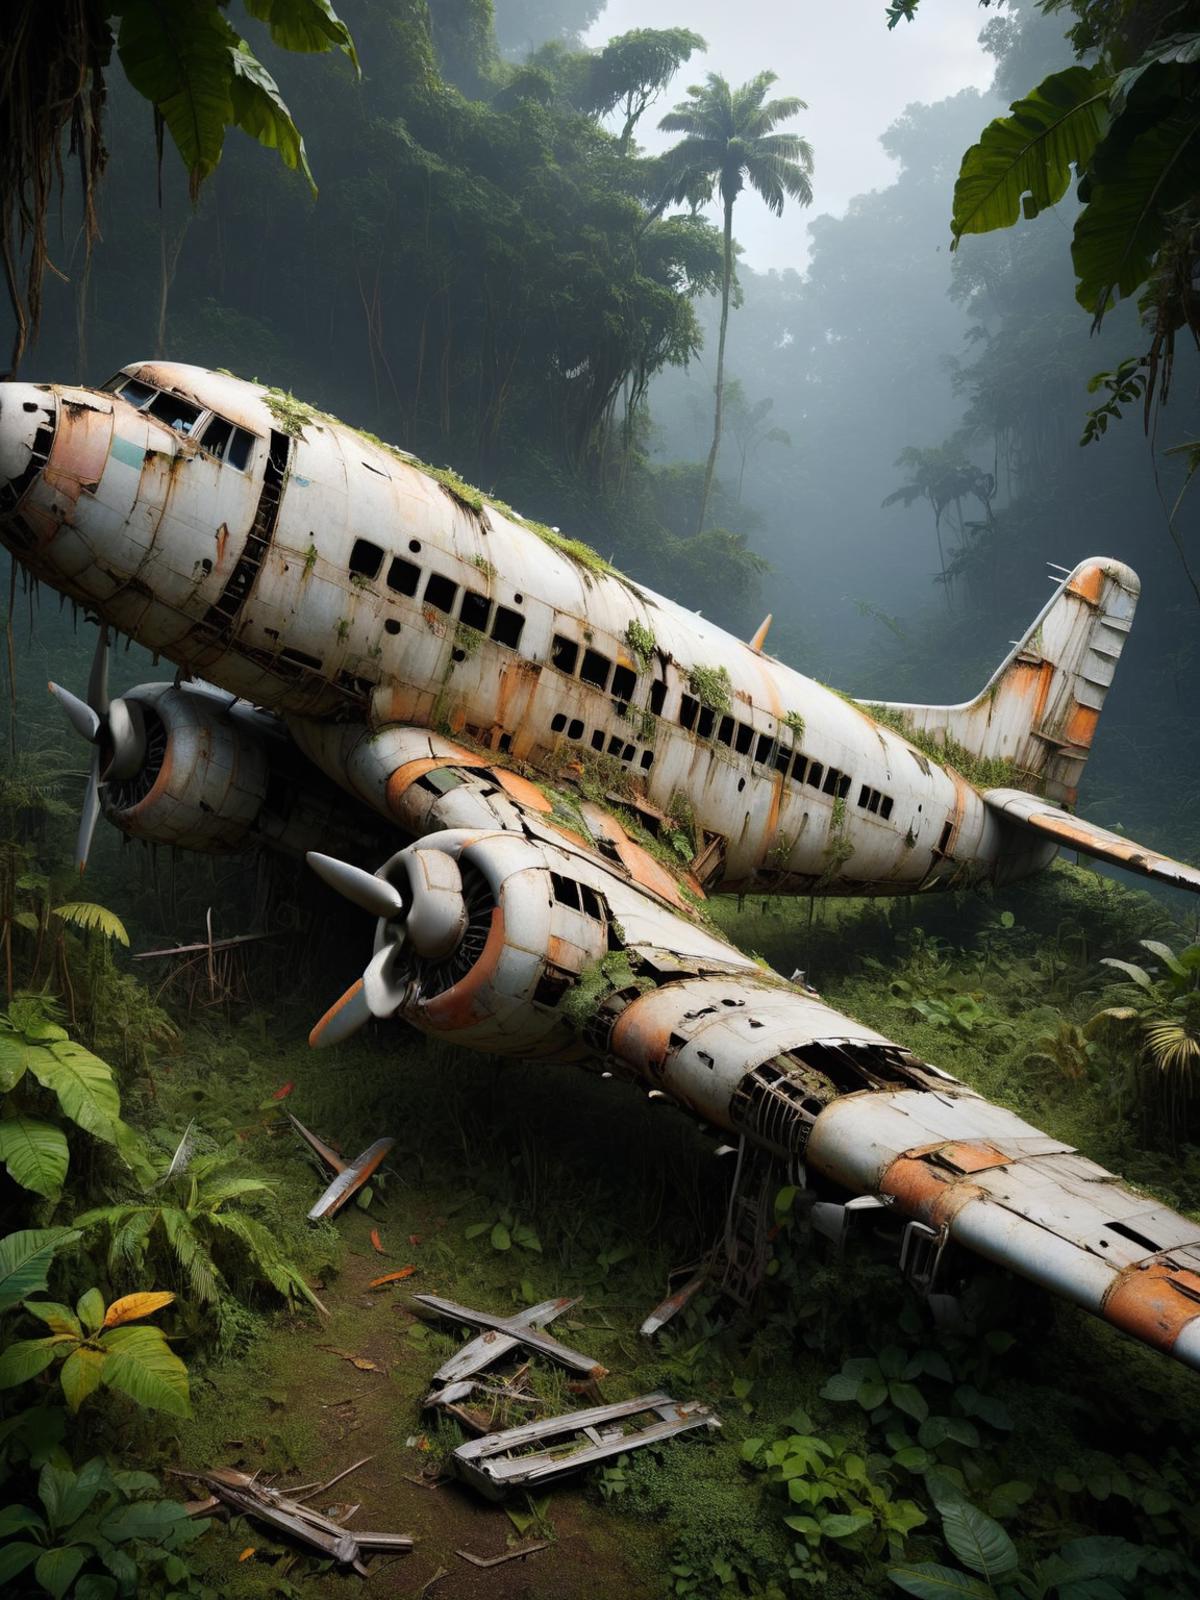 Rusty Airplane with Overgrown Vegetation in a Forest